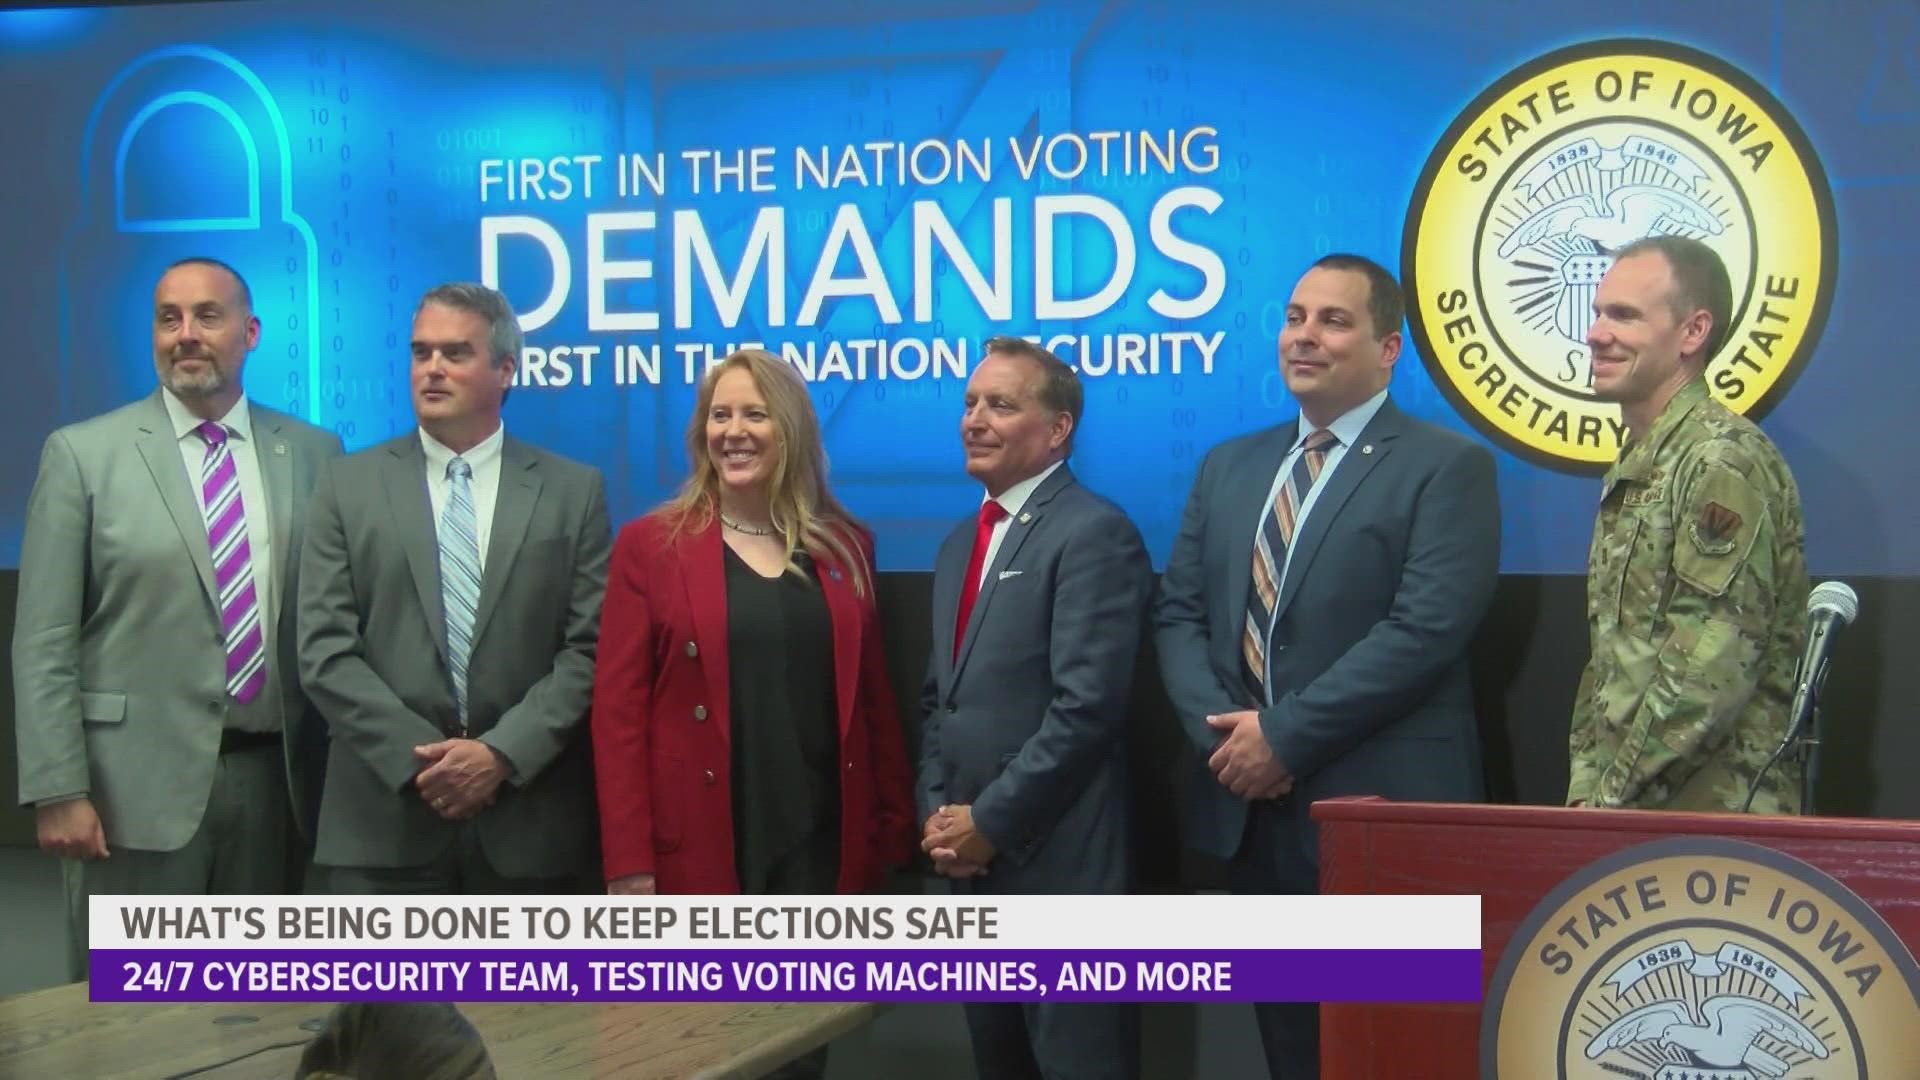 Secretary of State Paul Pate's "election A-team" warns that the biggest threat may be misinformation that divides Americans over election outcomes.